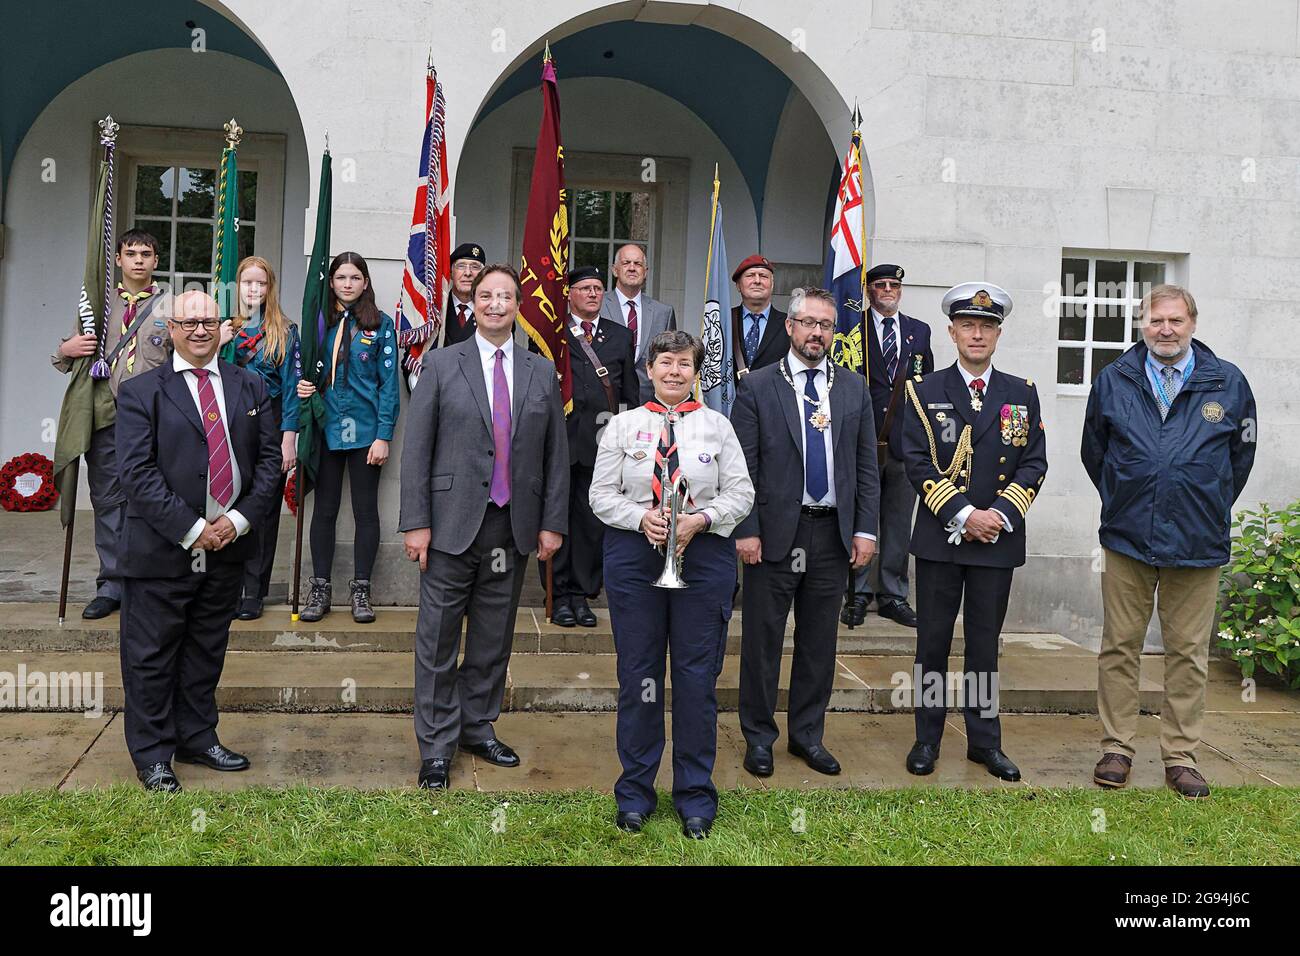 Front row left to right: Kevin Davis, Last Post Association; Jonathan Lord MP; Ruth Moore, Trumpeter; Cllr Liam Lyons, Woking Mayor; Captain Flamant, Defence Attache Belgian Embassy London & Angelo Munsel, American Military Cemetery Superintendent. Standard Bearers & Paul McCue of the Secret WW2 Learning Network in the background. 80th Anniversary Service of Brookwood Last Post Association. Stock Photo